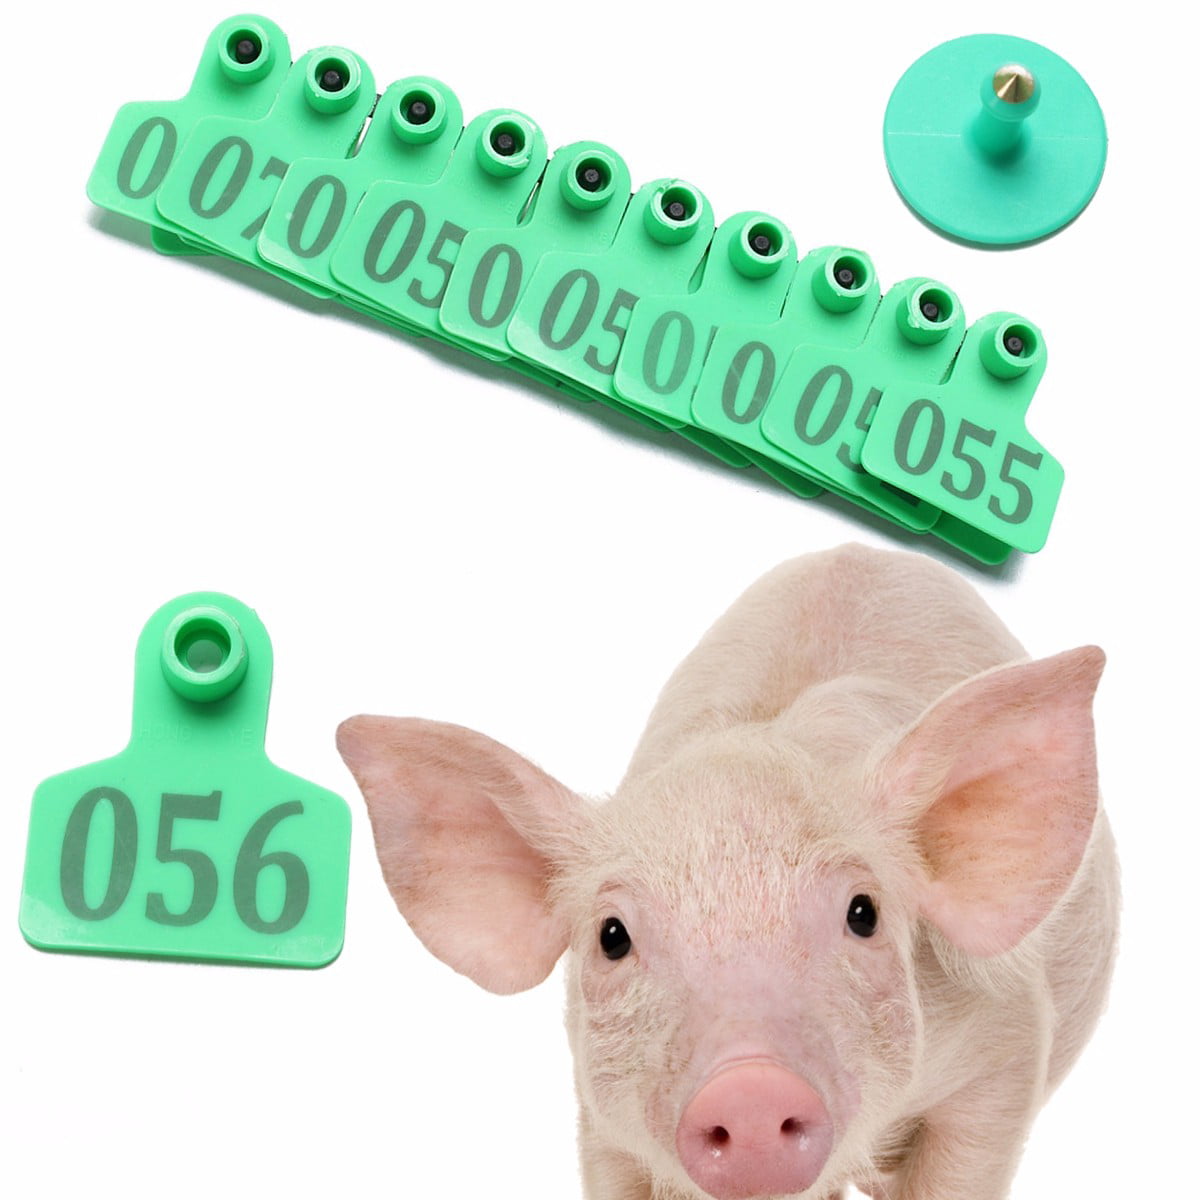 100PCS Small Numbered Livestock Ear Tag for Pig Cow Cattle Goat Sheep Green 